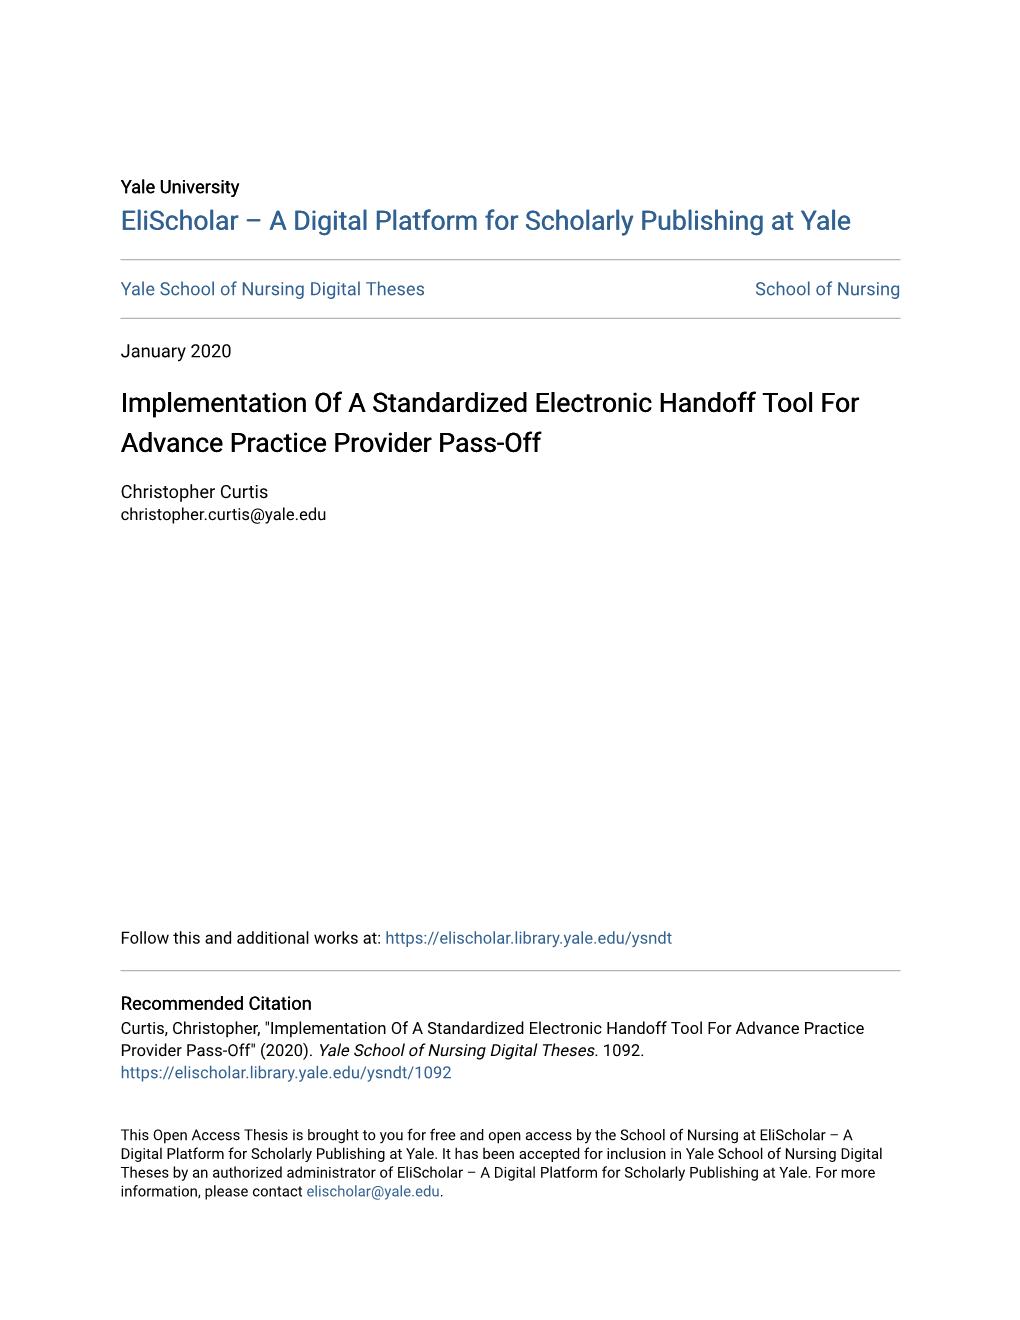 Implementation of a Standardized Electronic Handoff Tool for Advance Practice Provider Pass-Off